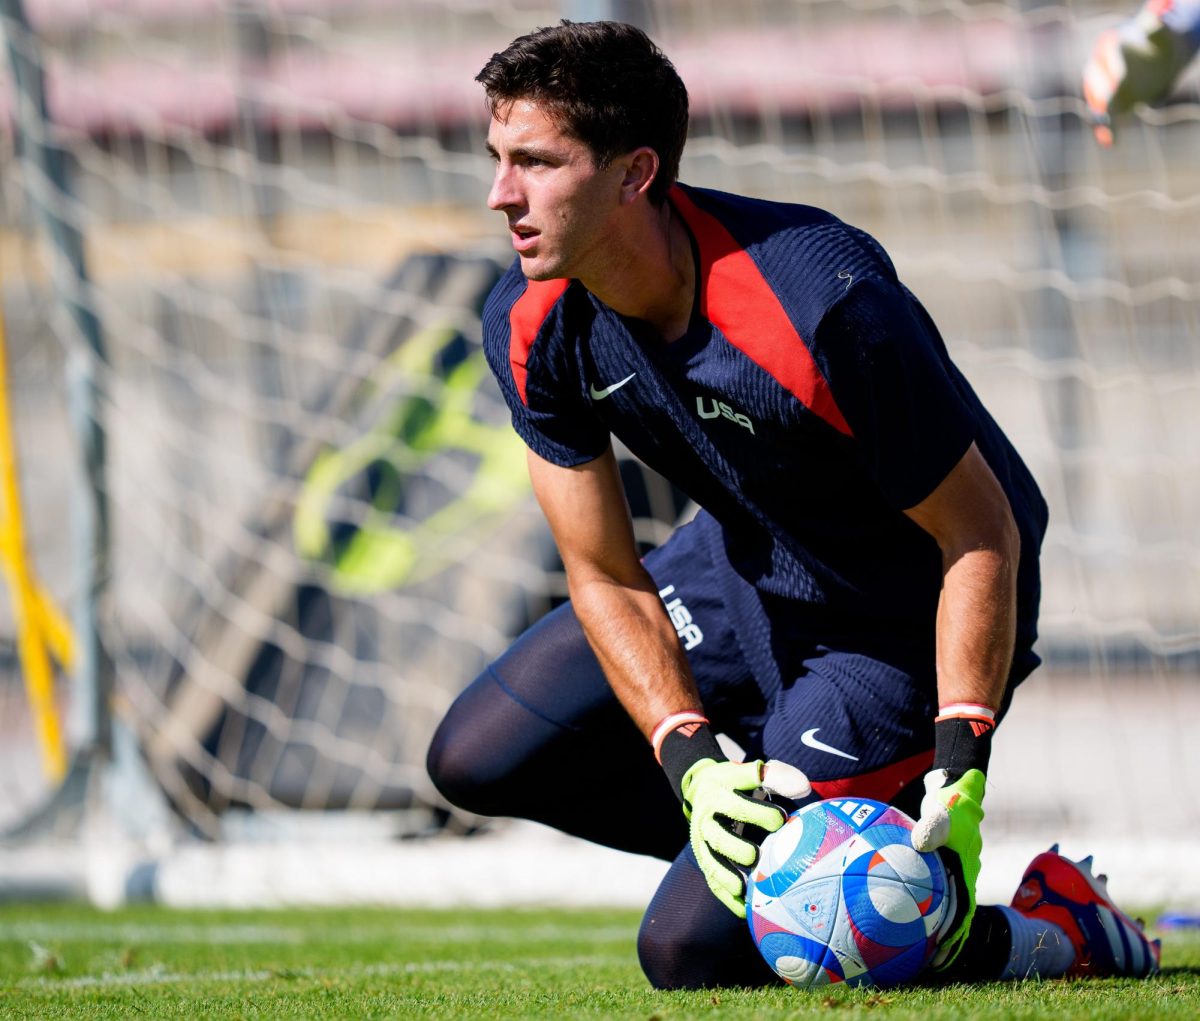 Goaltender Patrick Schulte catches the ball during Olympic training for the US mens national soccer team July 23, 2024, in Marseille, France. (Photo courtesy: Andrea Vilchez/USSF)